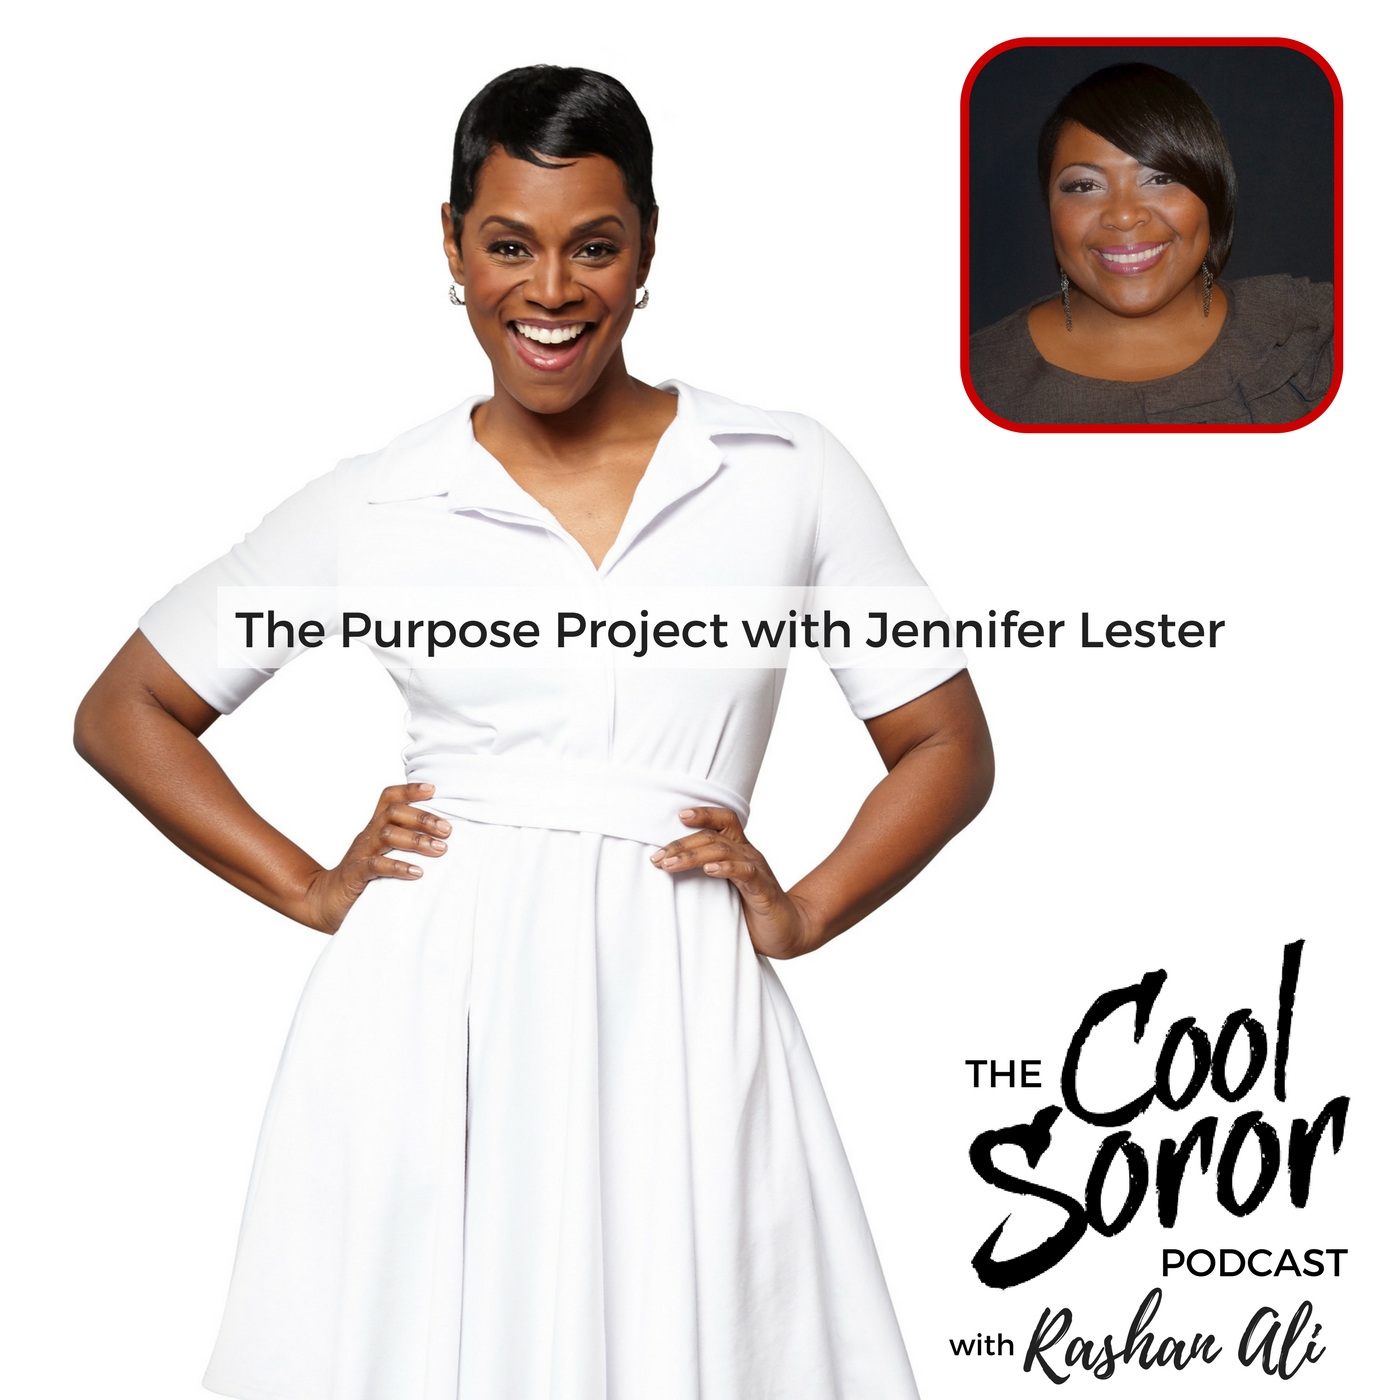 The Purpose Project with Jennifer Lester